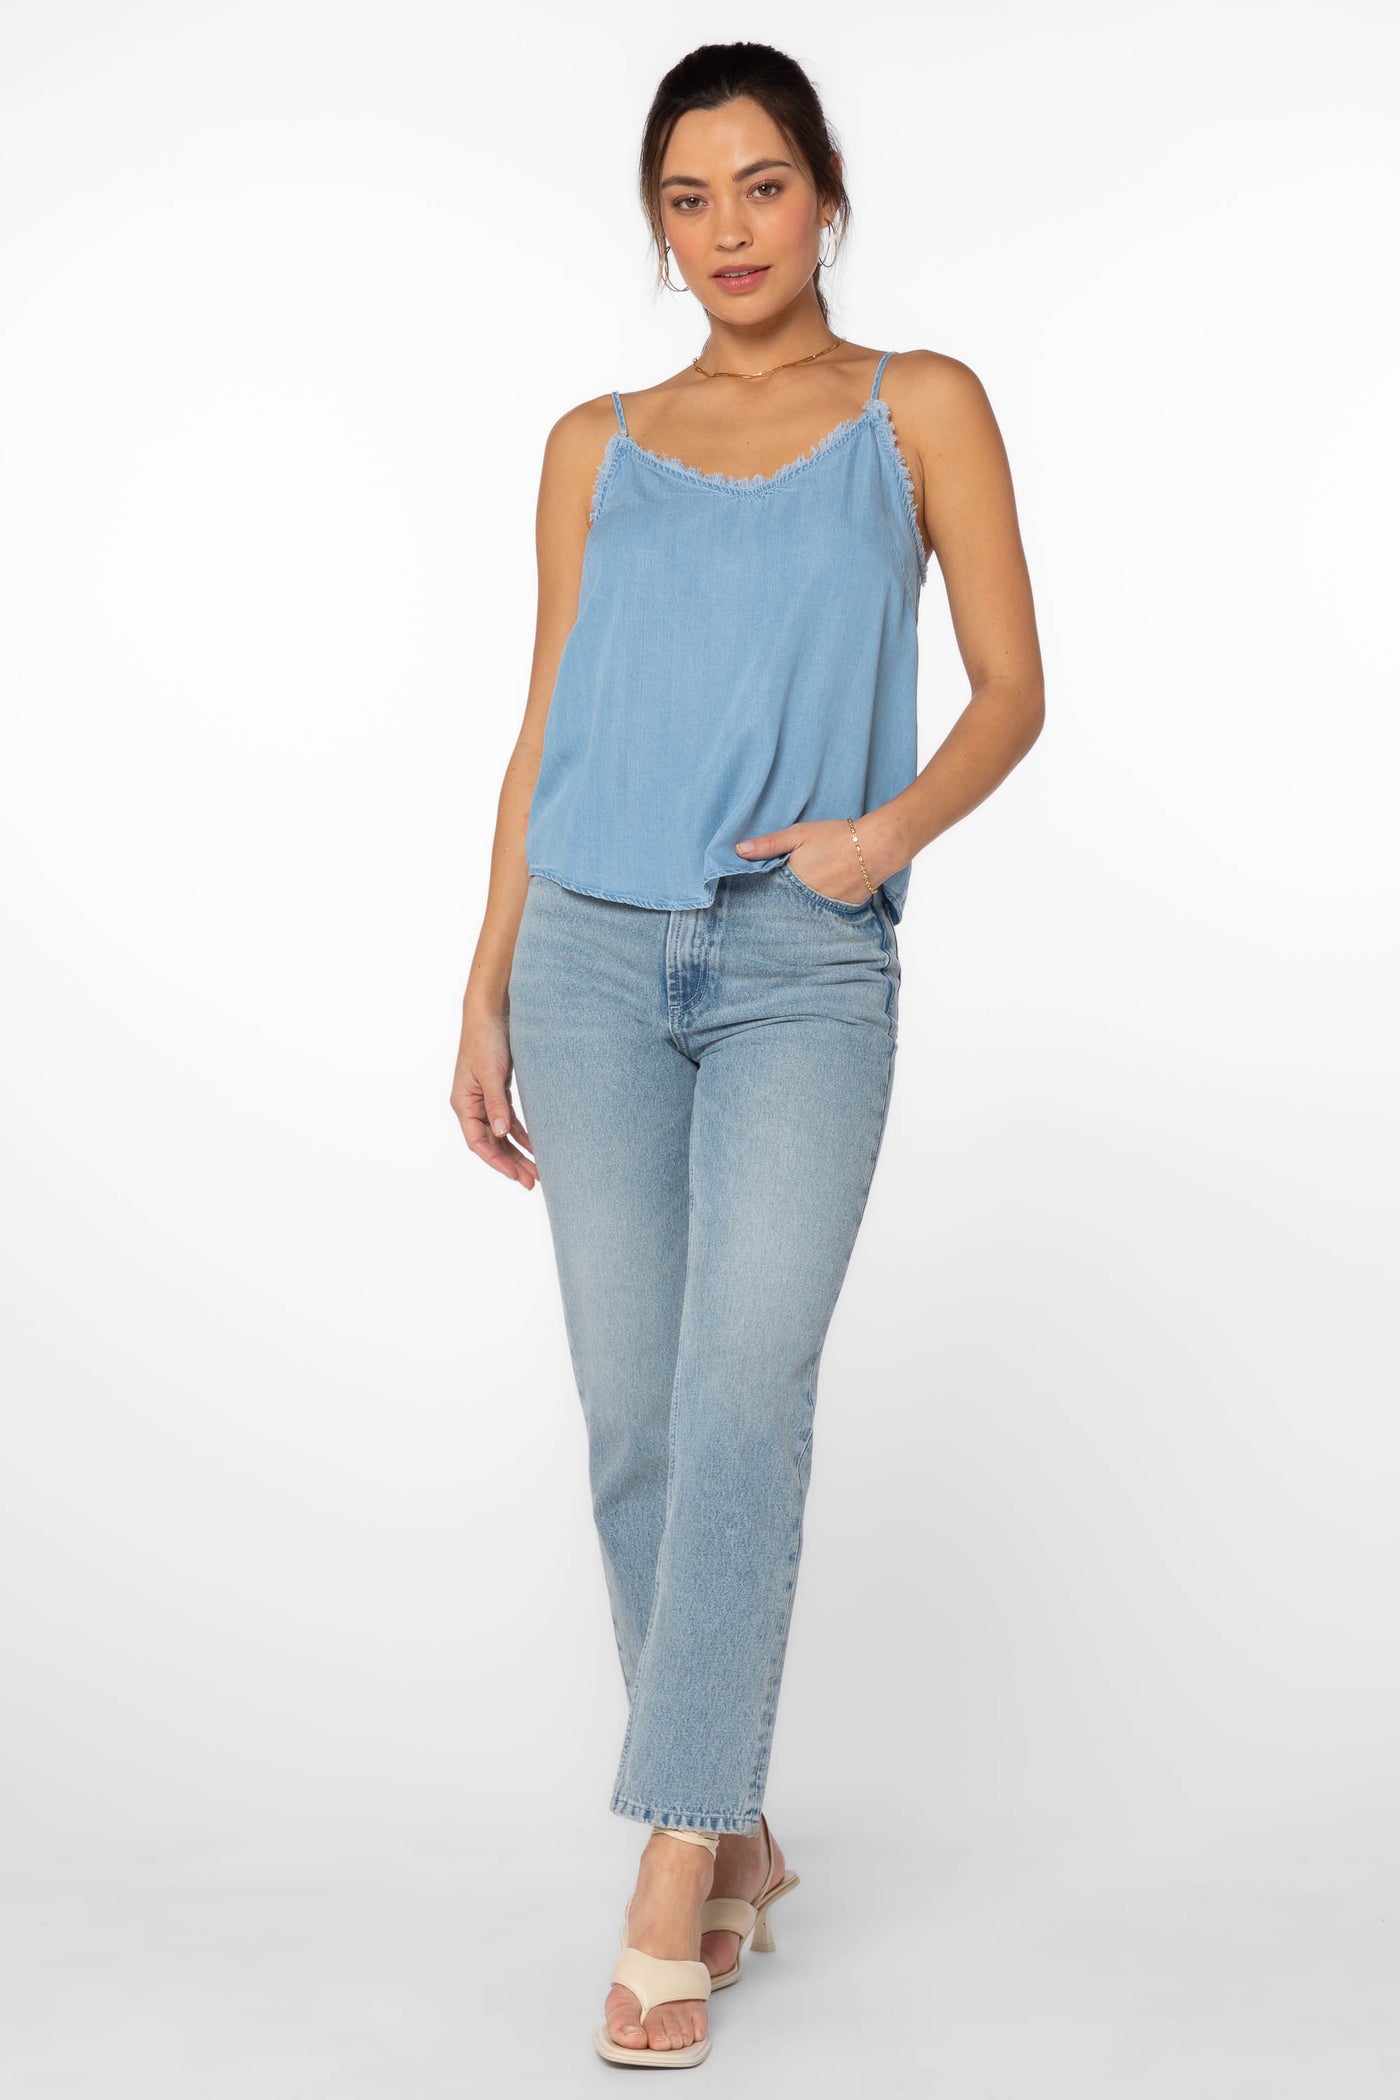 Victory Baby Blue Cami - Tops - Velvet Heart Clothing